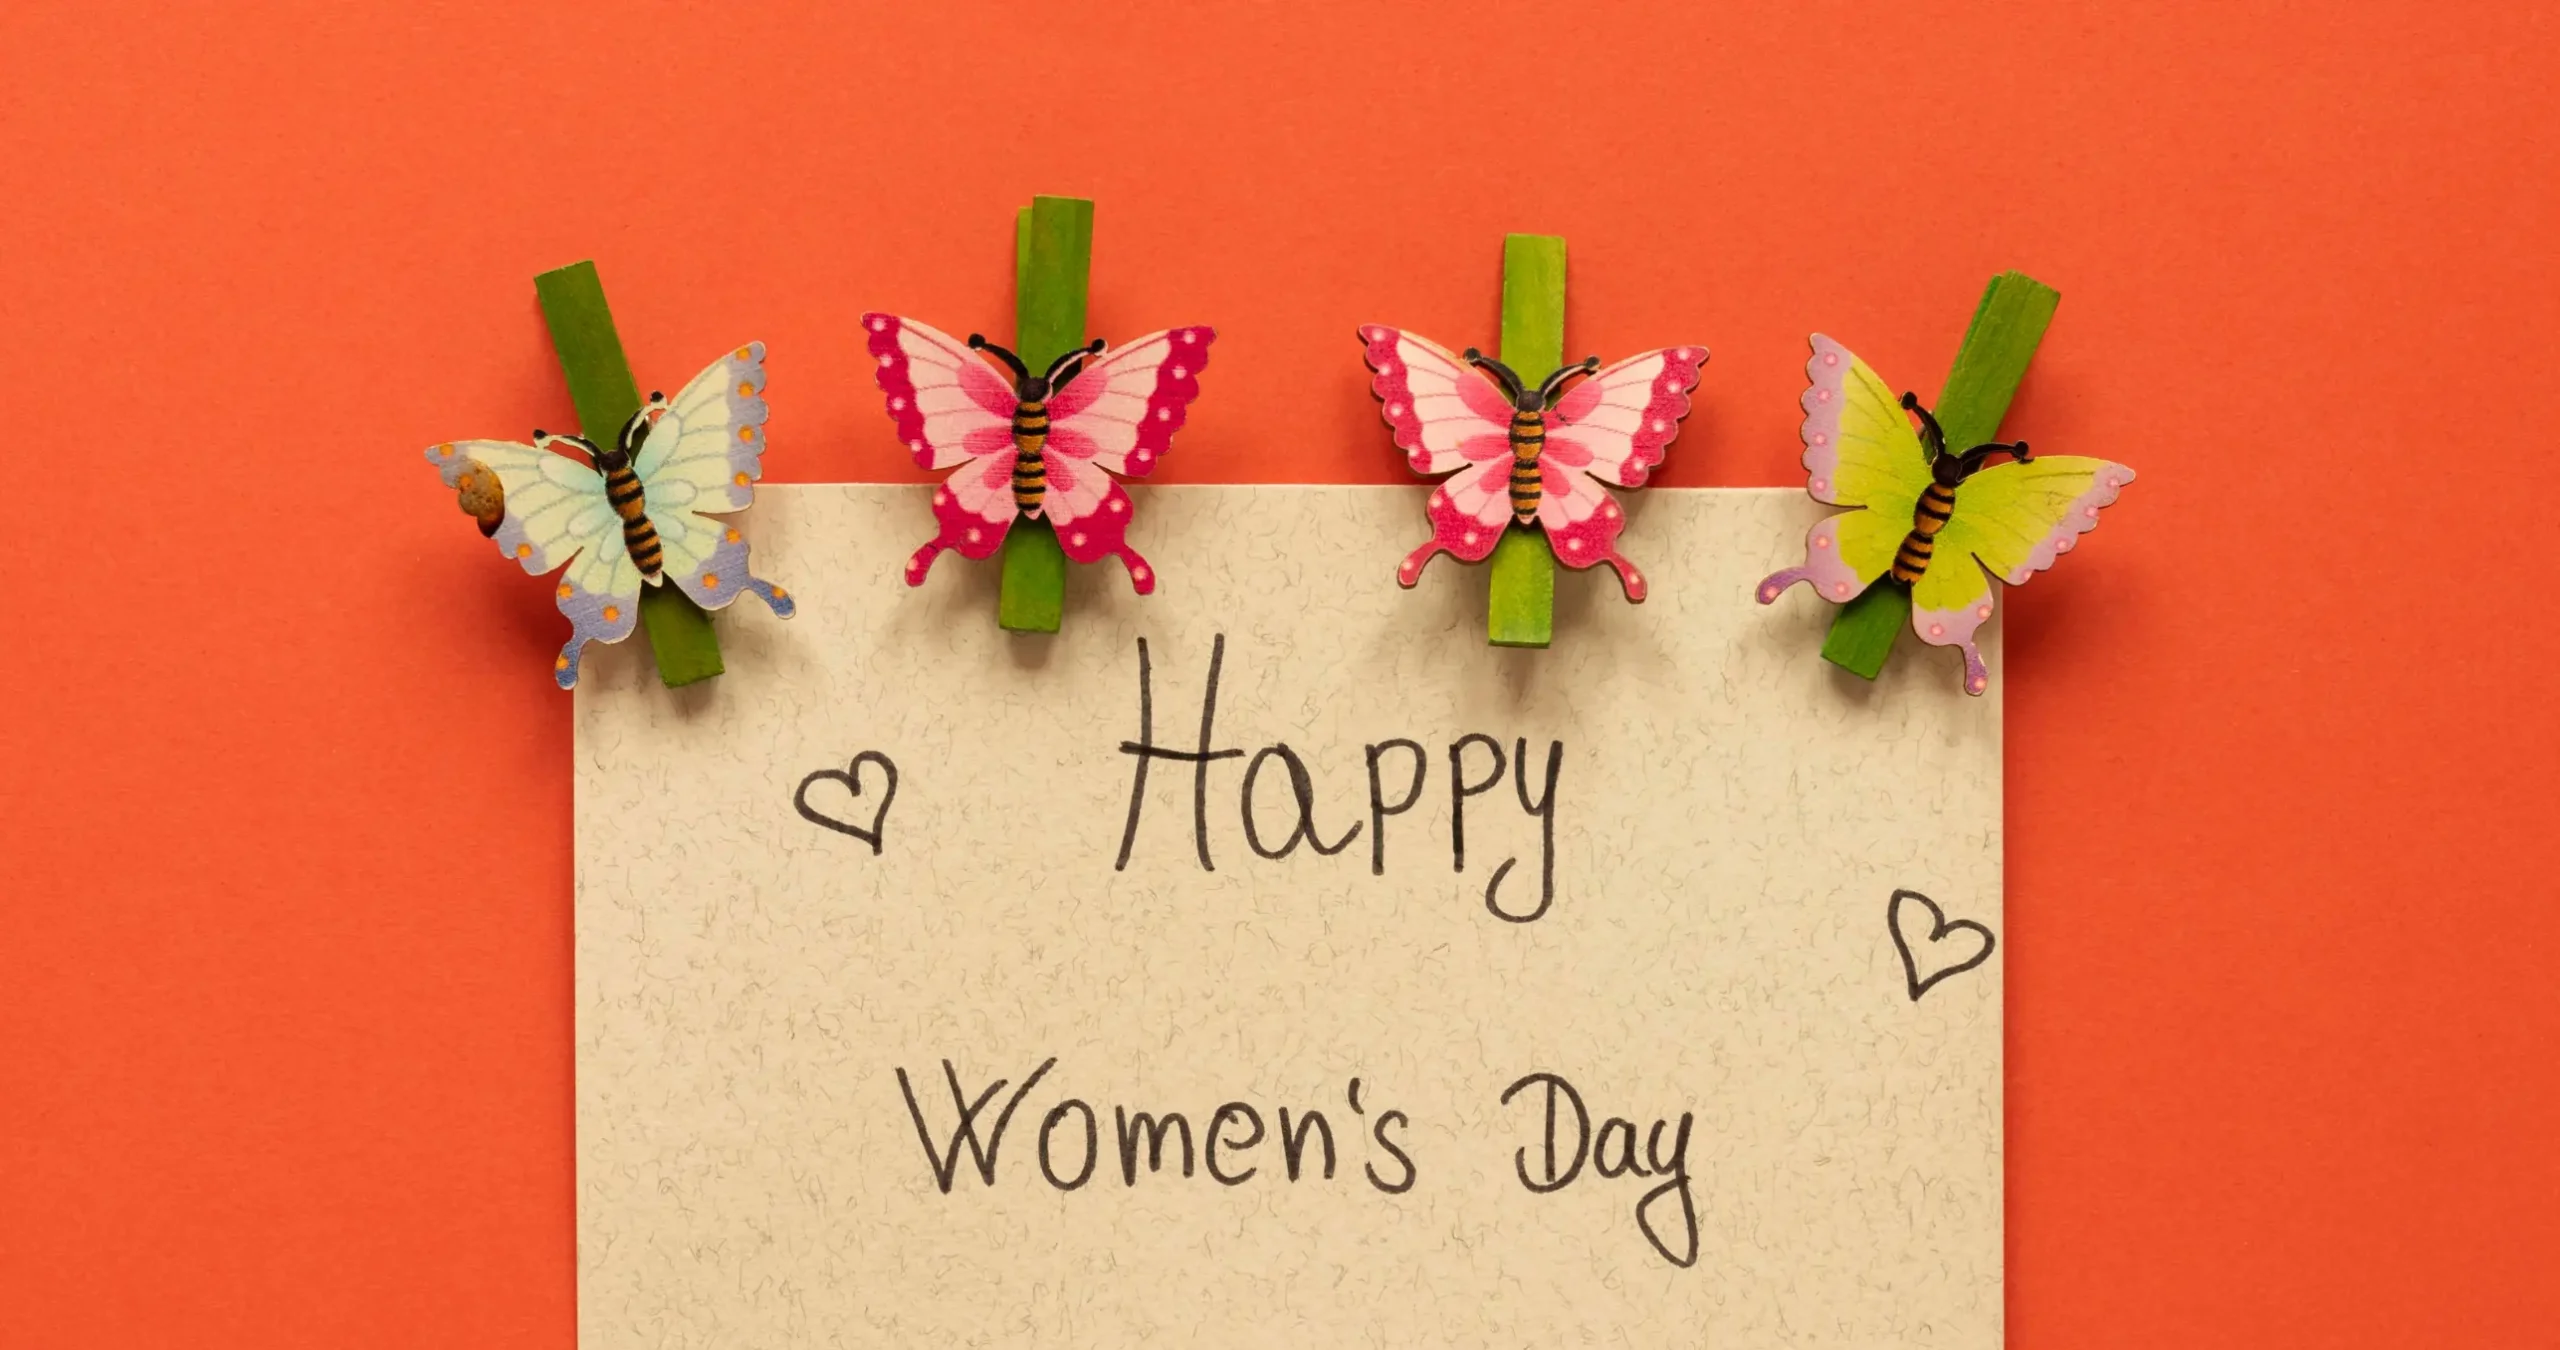 Today and every day, we celebrate the incredible women who inspire